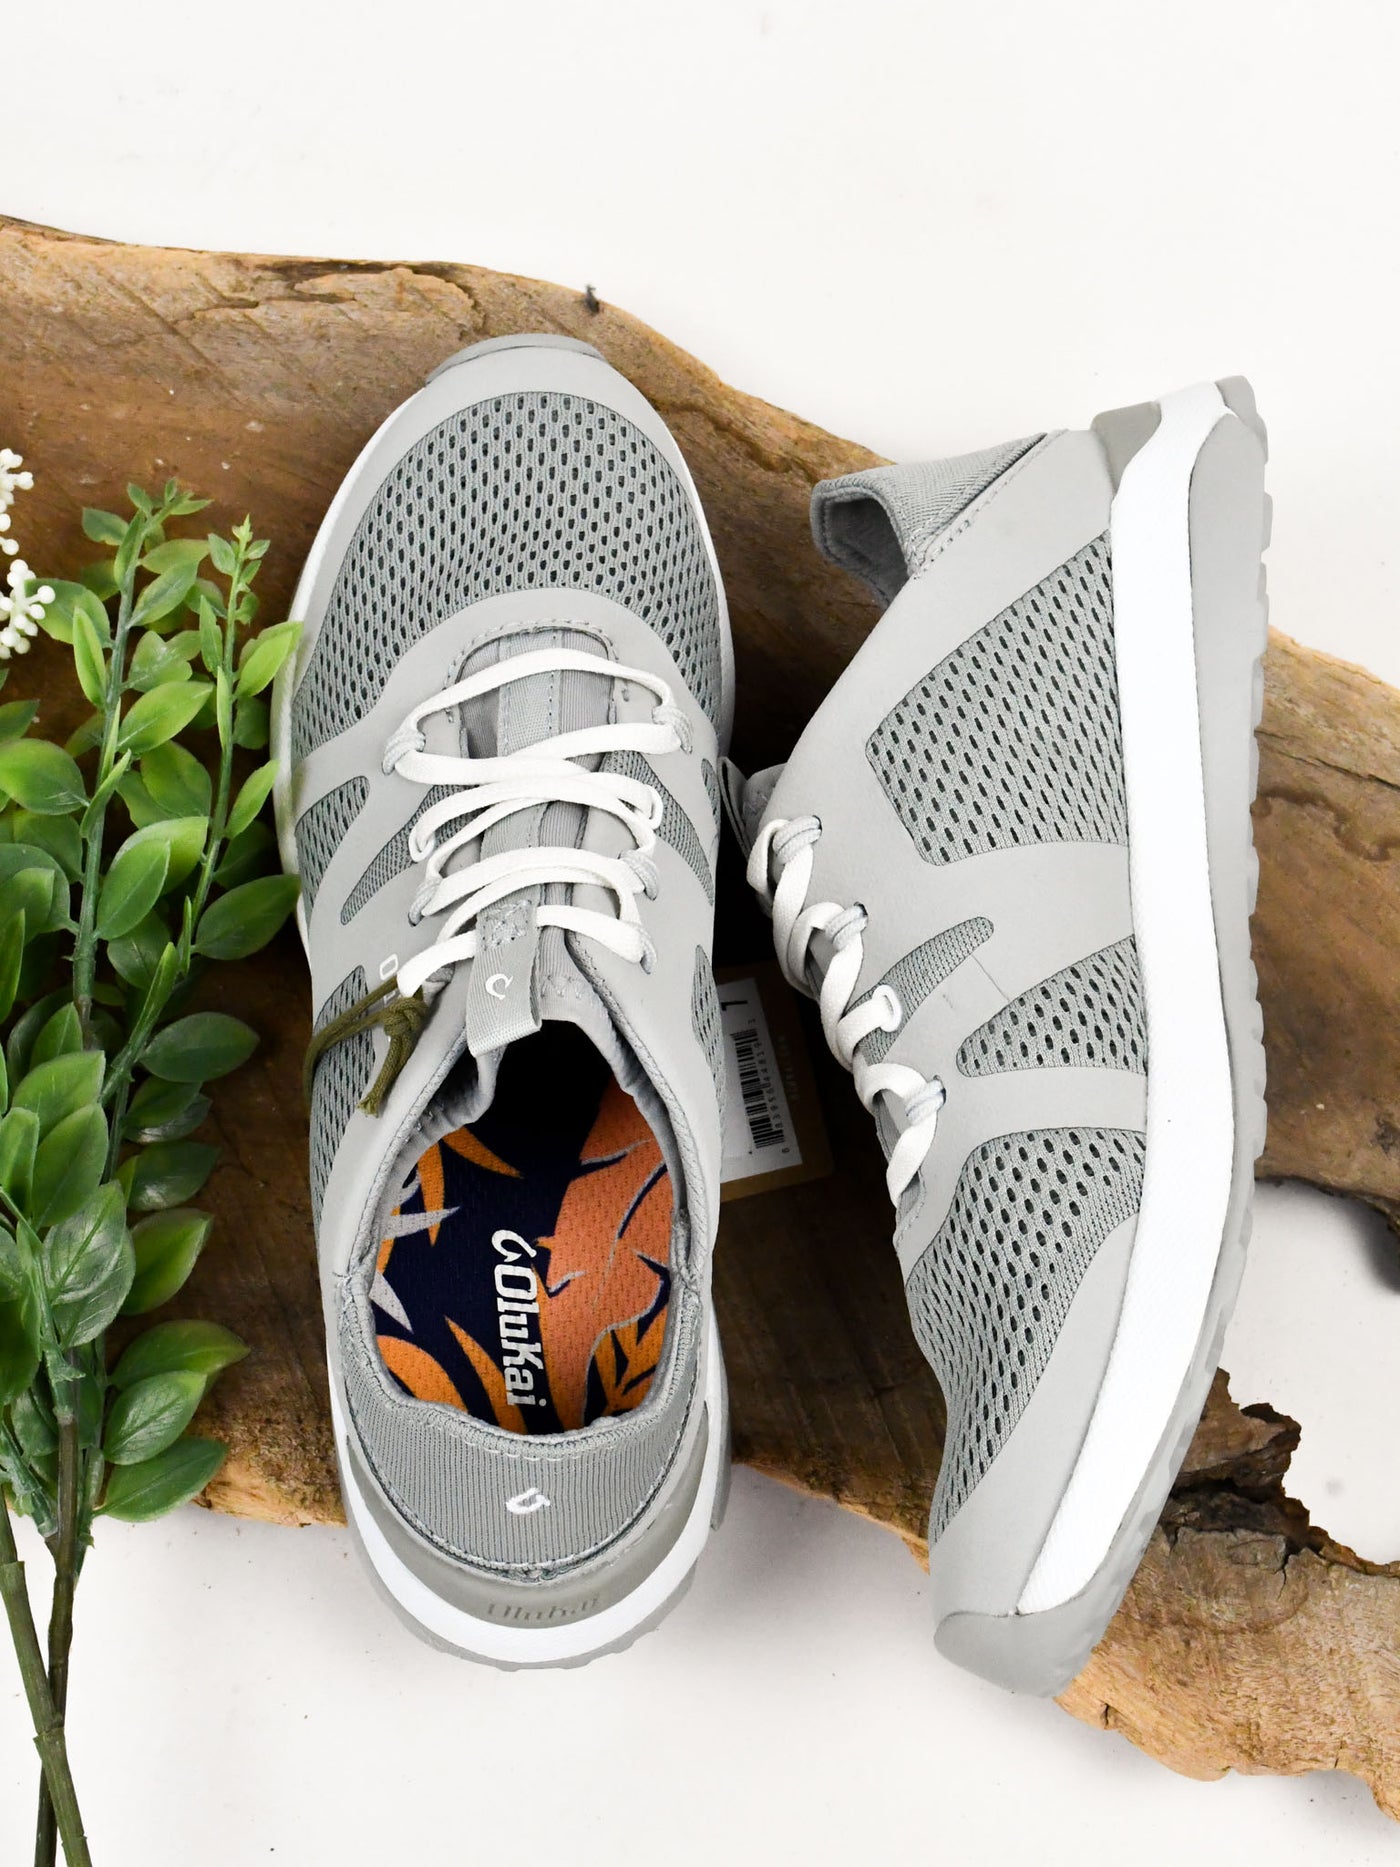 A gray women's athleisure sneaker with white laces.